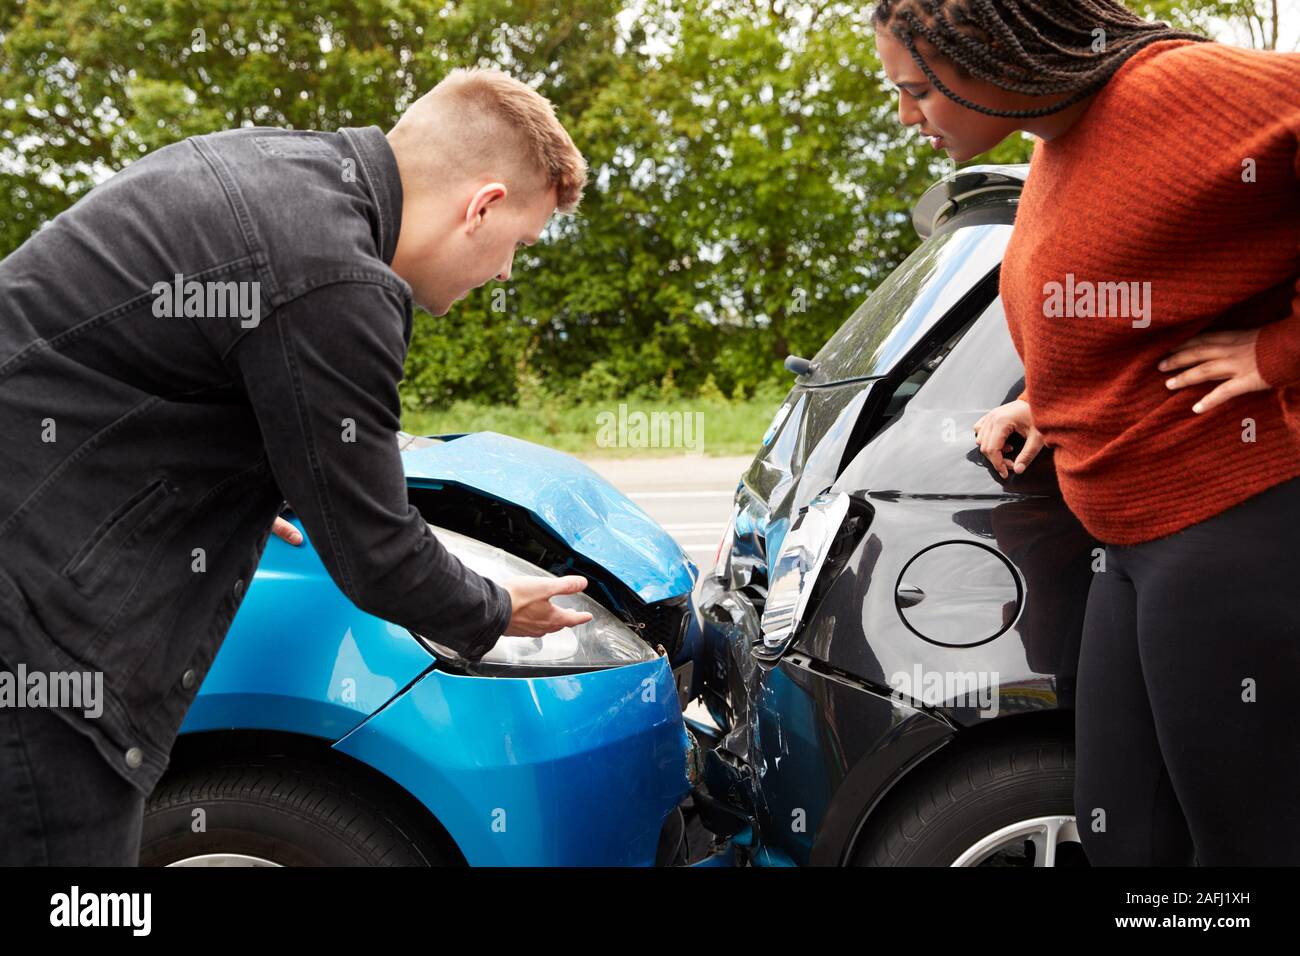 Two Angry Motorists Arguing Over Responsibility For Car Accident Stock Photo